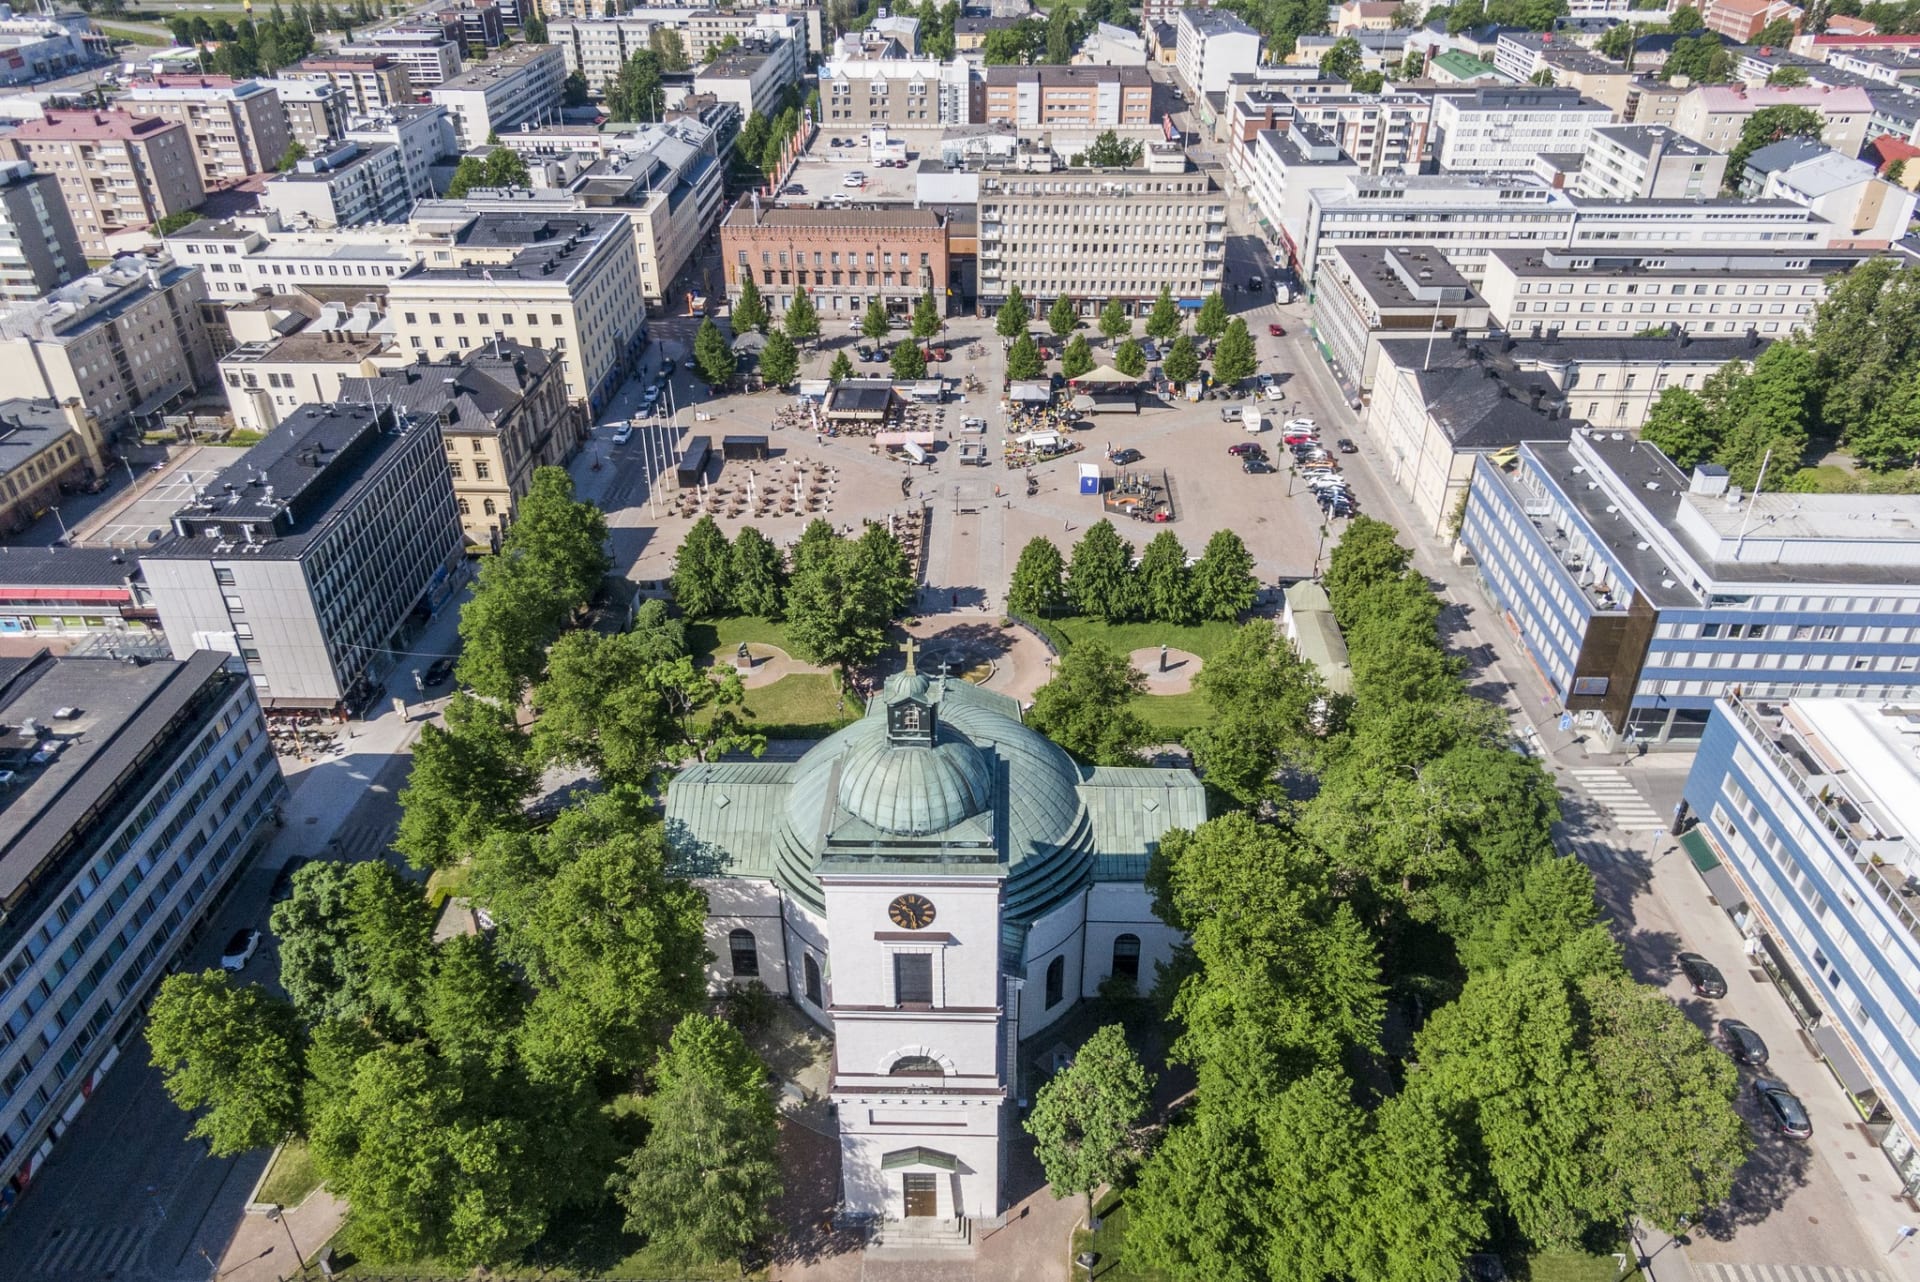 Hämeenlinna marketplace and church from the air.